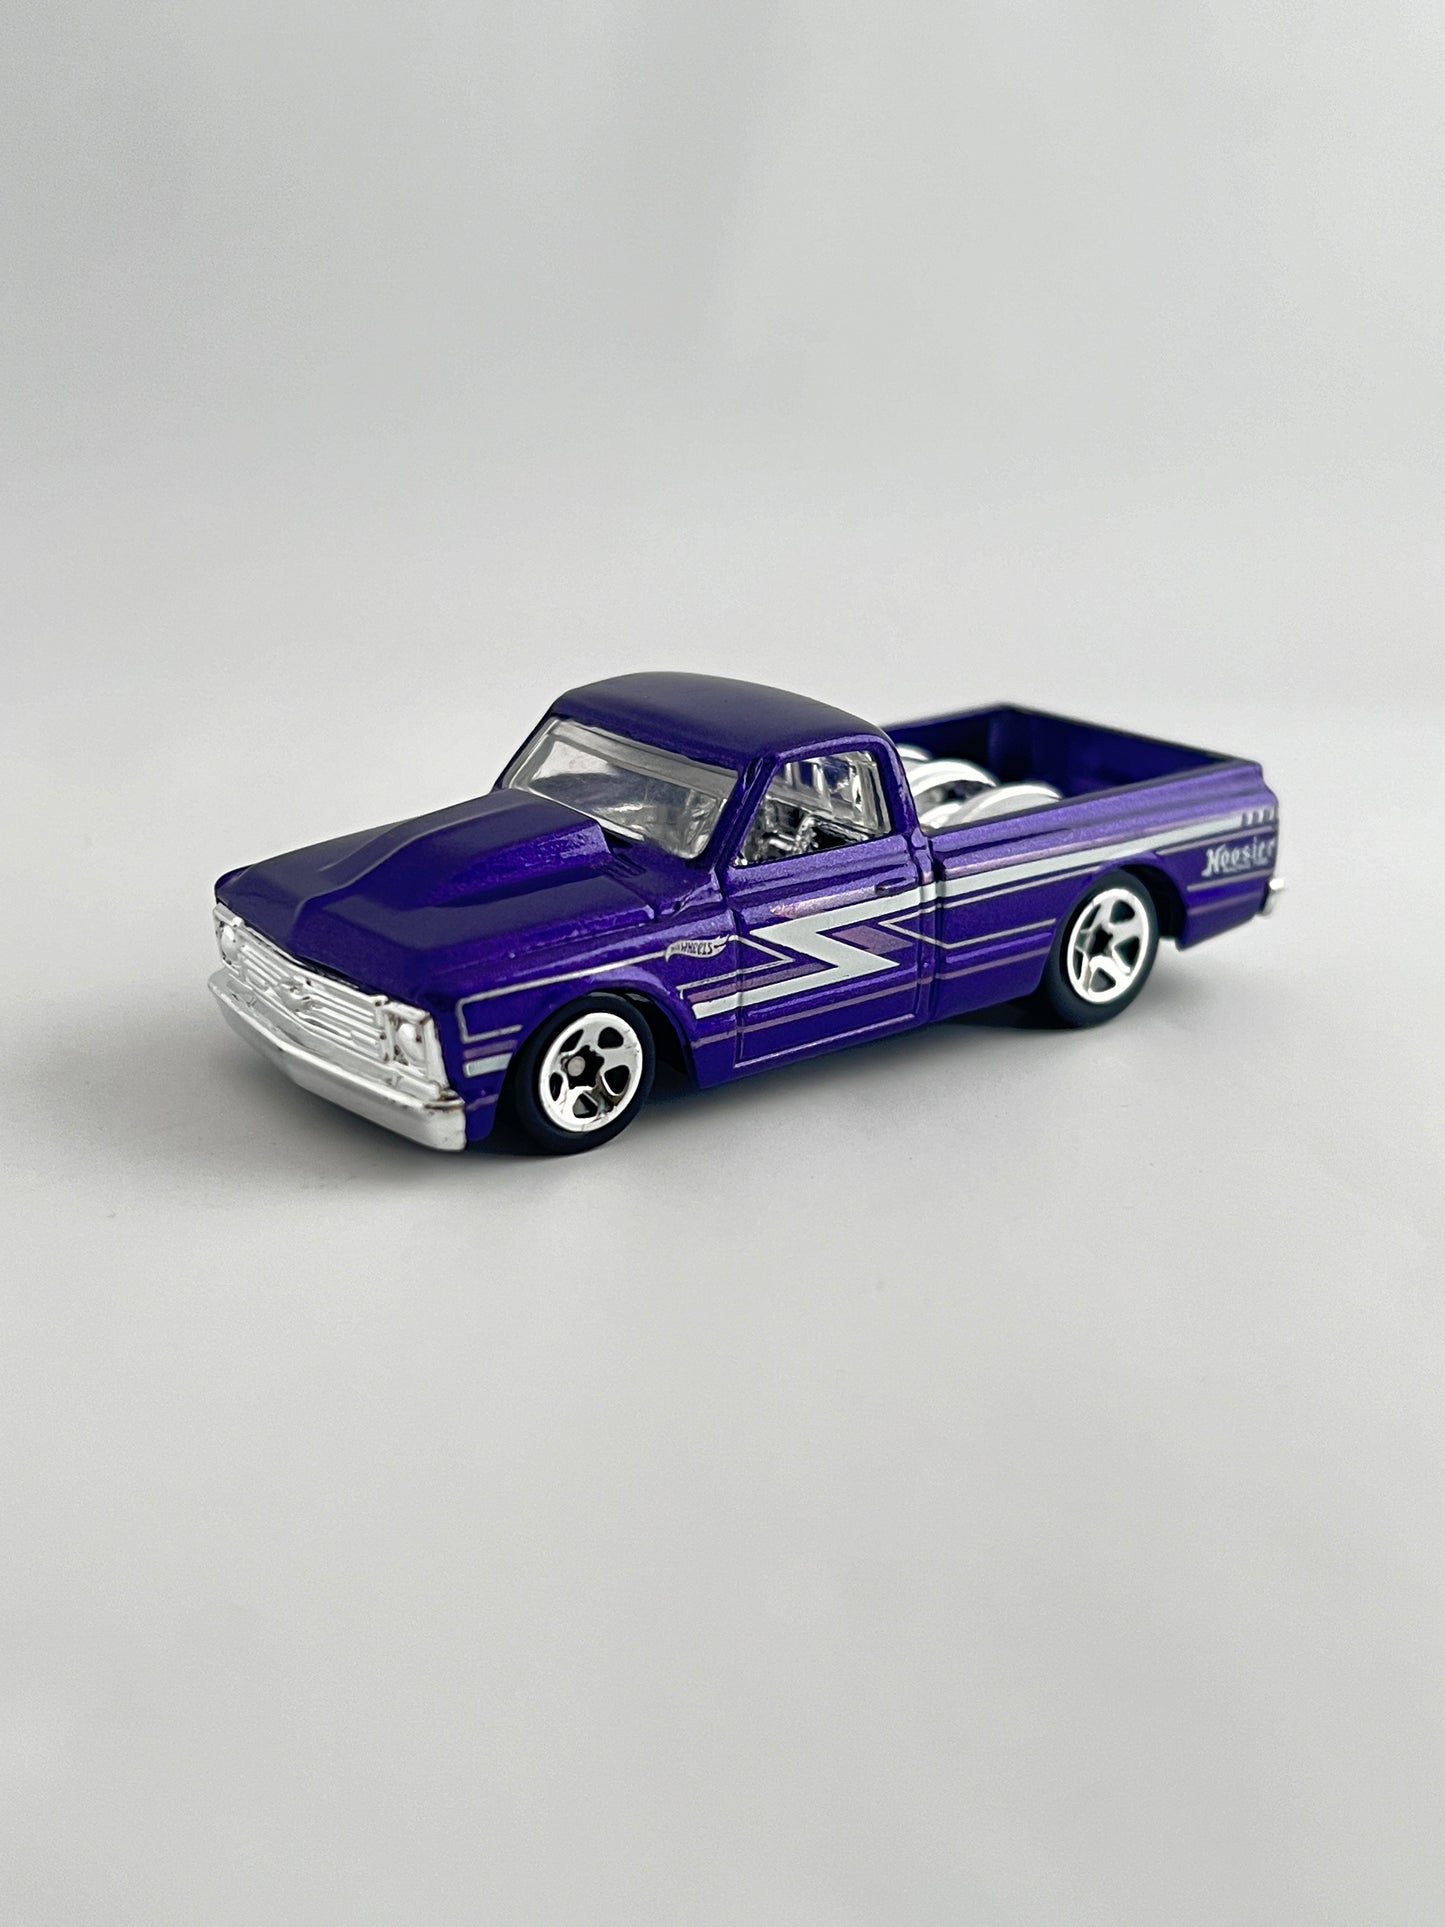 67 CHEVY C10 - UNCARDED - MINT CONDITION